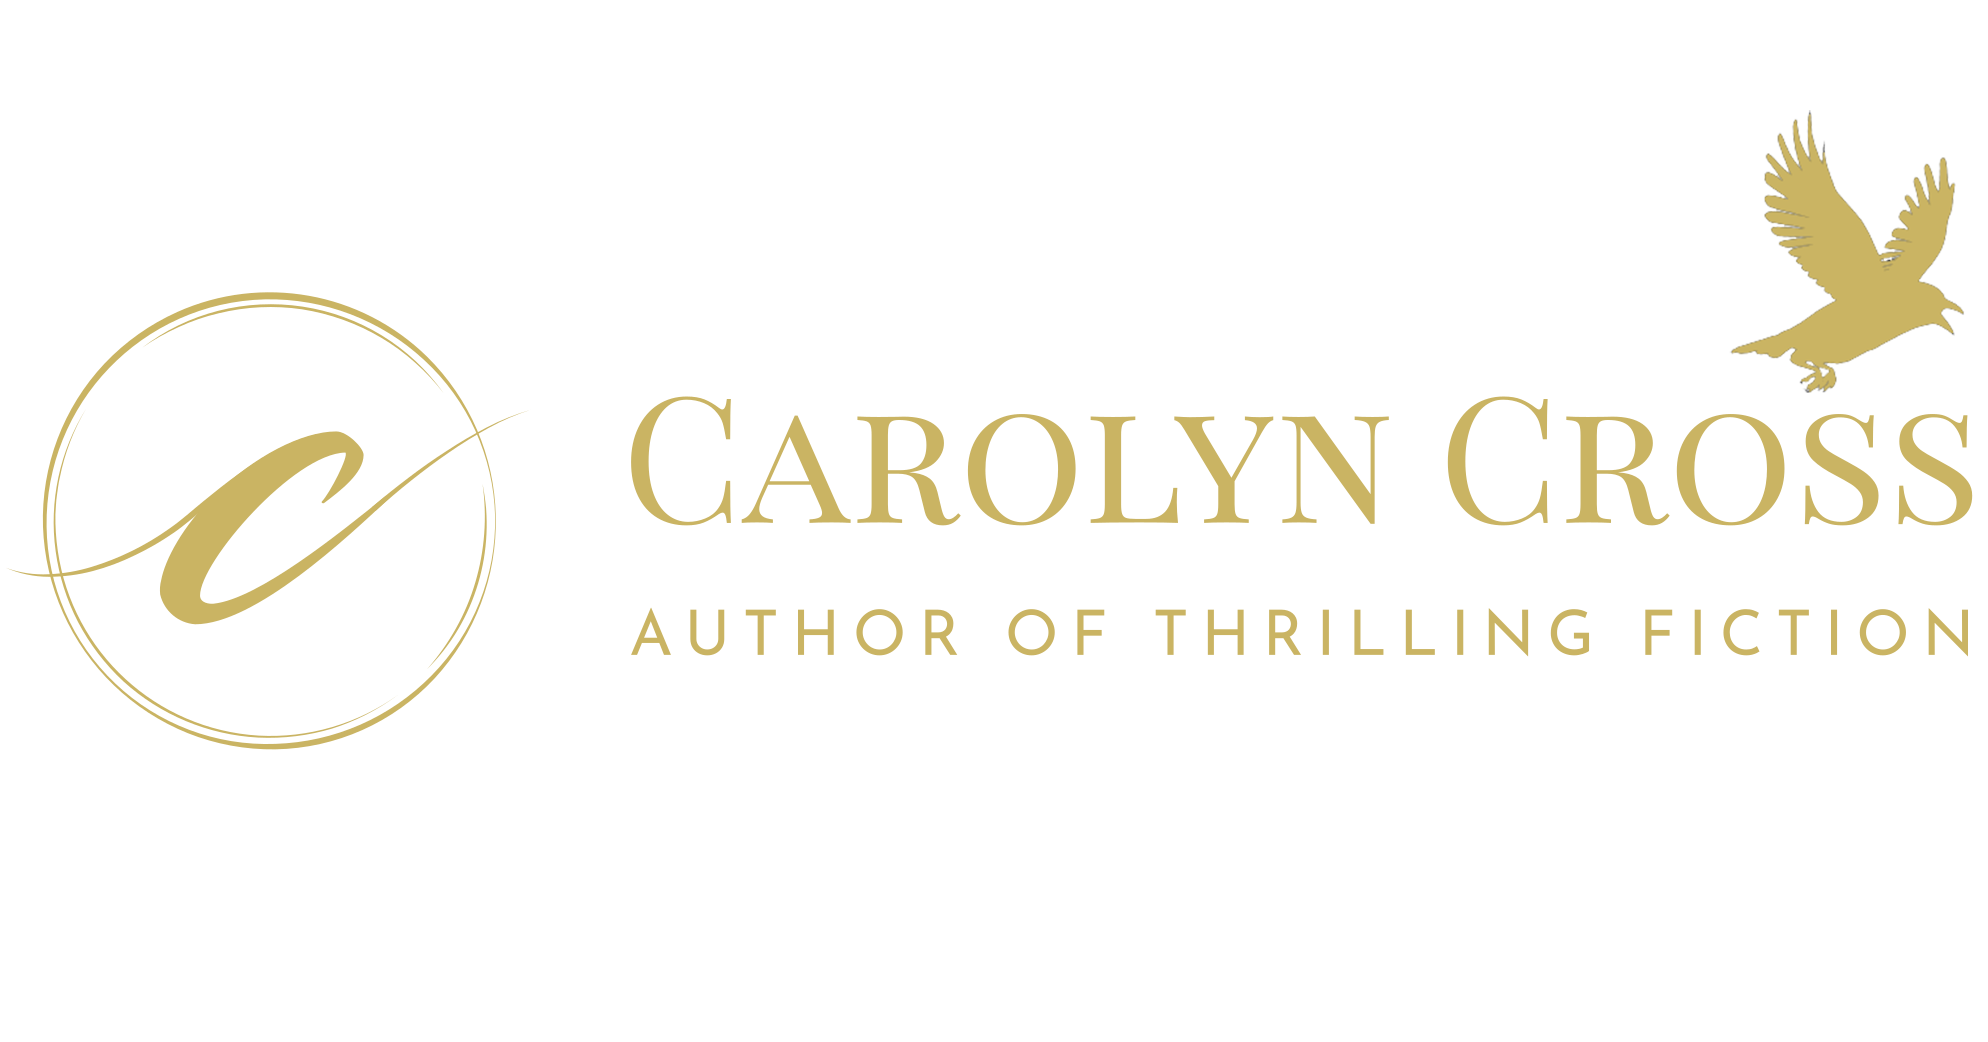 Carolyn Cross, Author of Thrilling Fiction